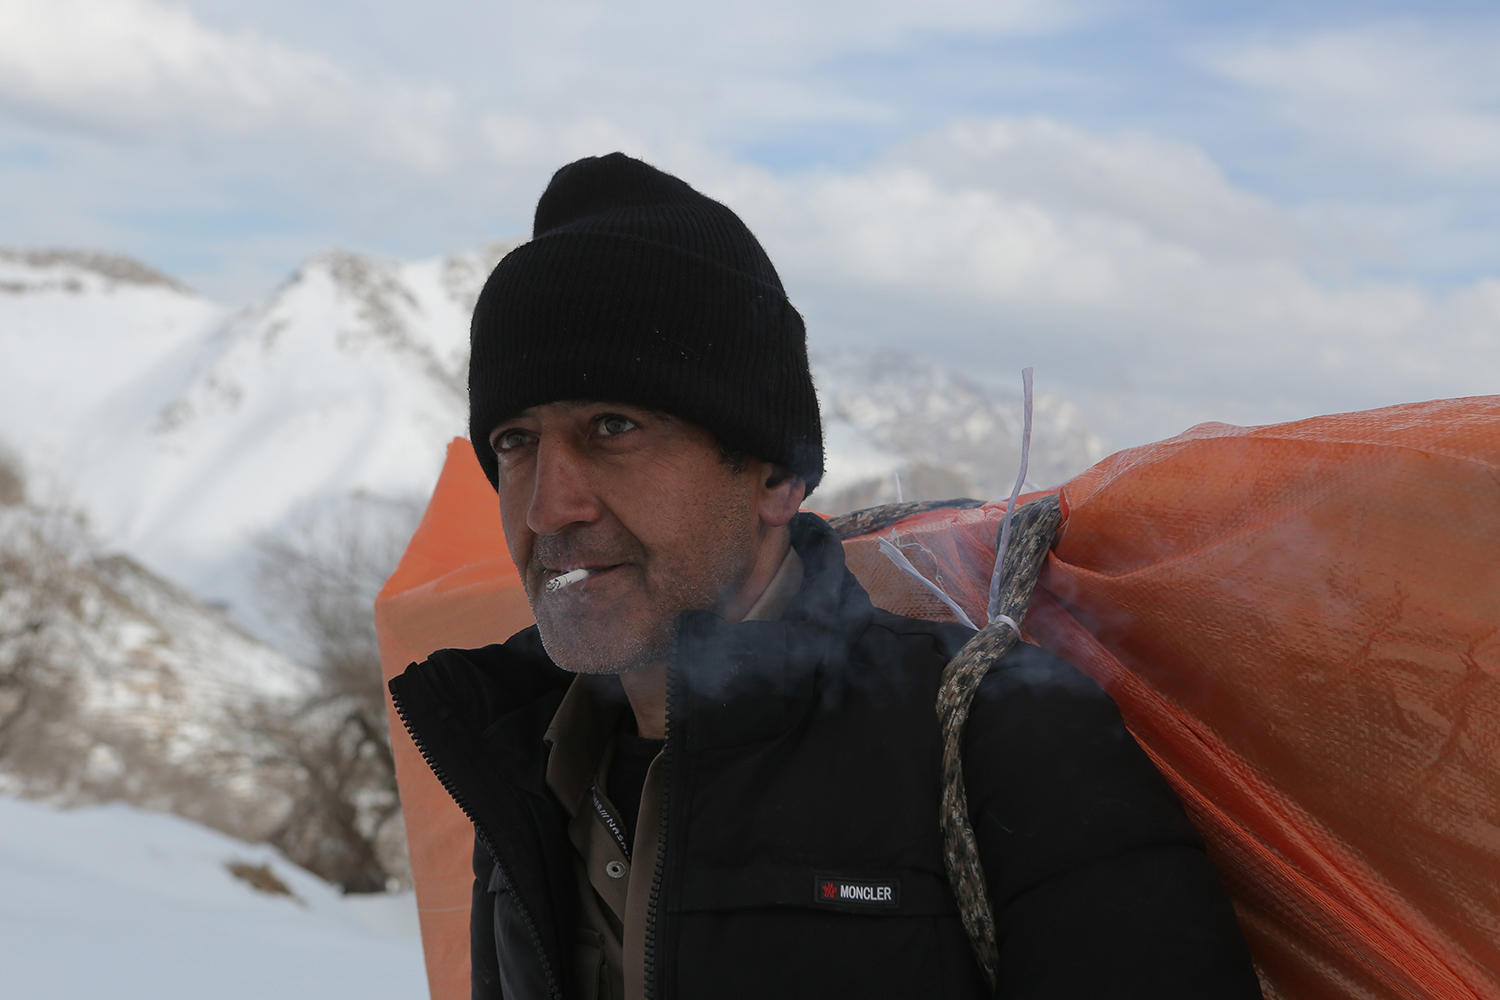 After a short cigarette break, a fully laden kolbar sets out on the final leg of the journey. Exposure to the mercy of the elements is not the only risk for kolbars, who are regularly monitored and frequently shot at by Iranian border patrol officers 